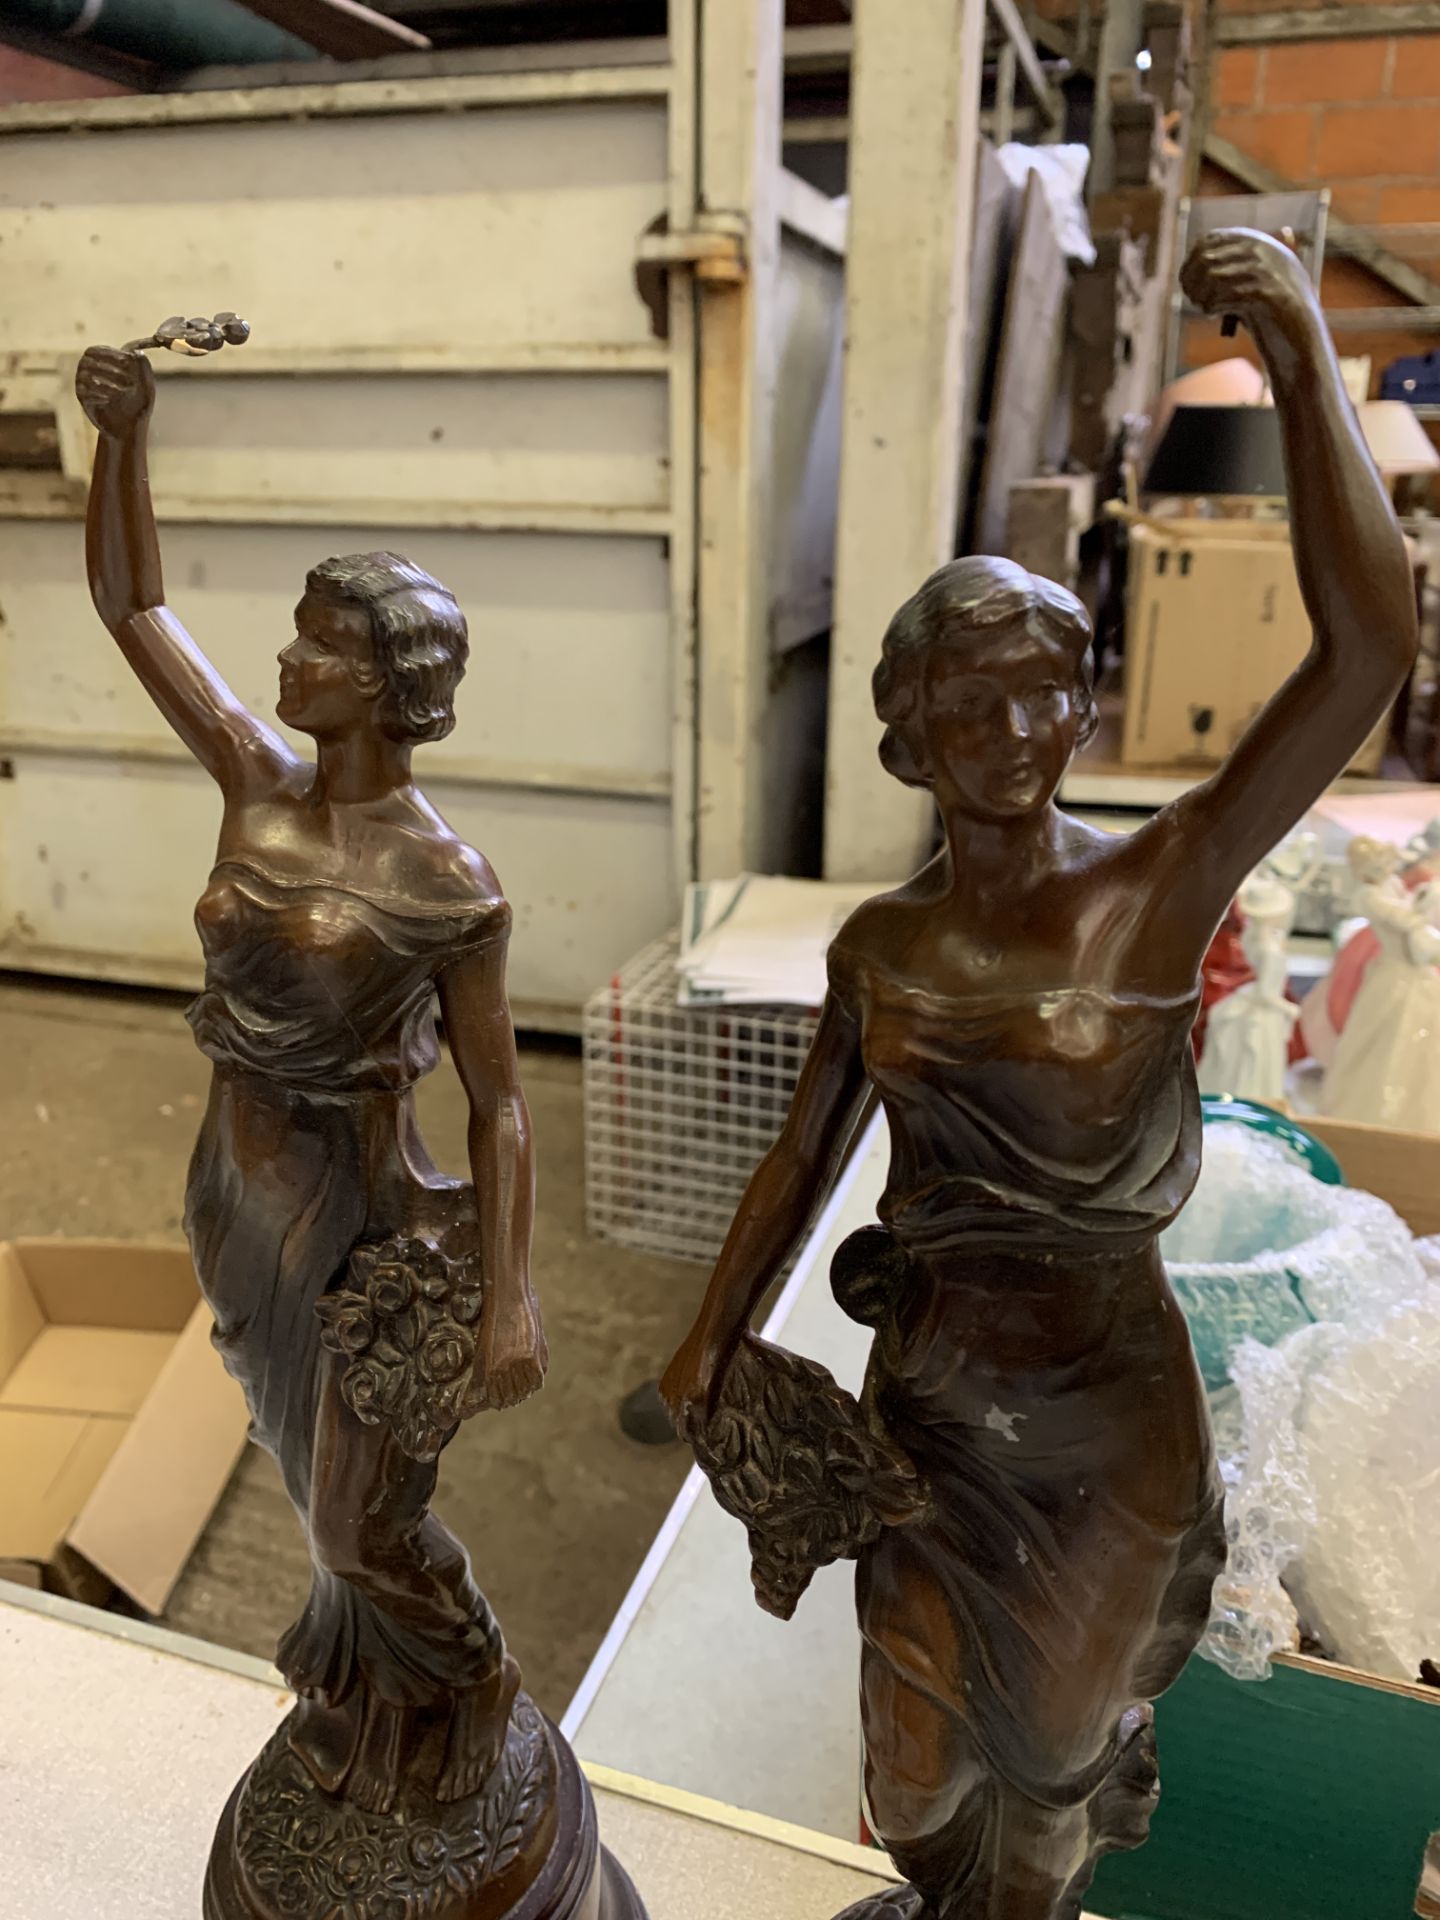 Pair of French-style metal Art Nouveau figurines - Image 2 of 4